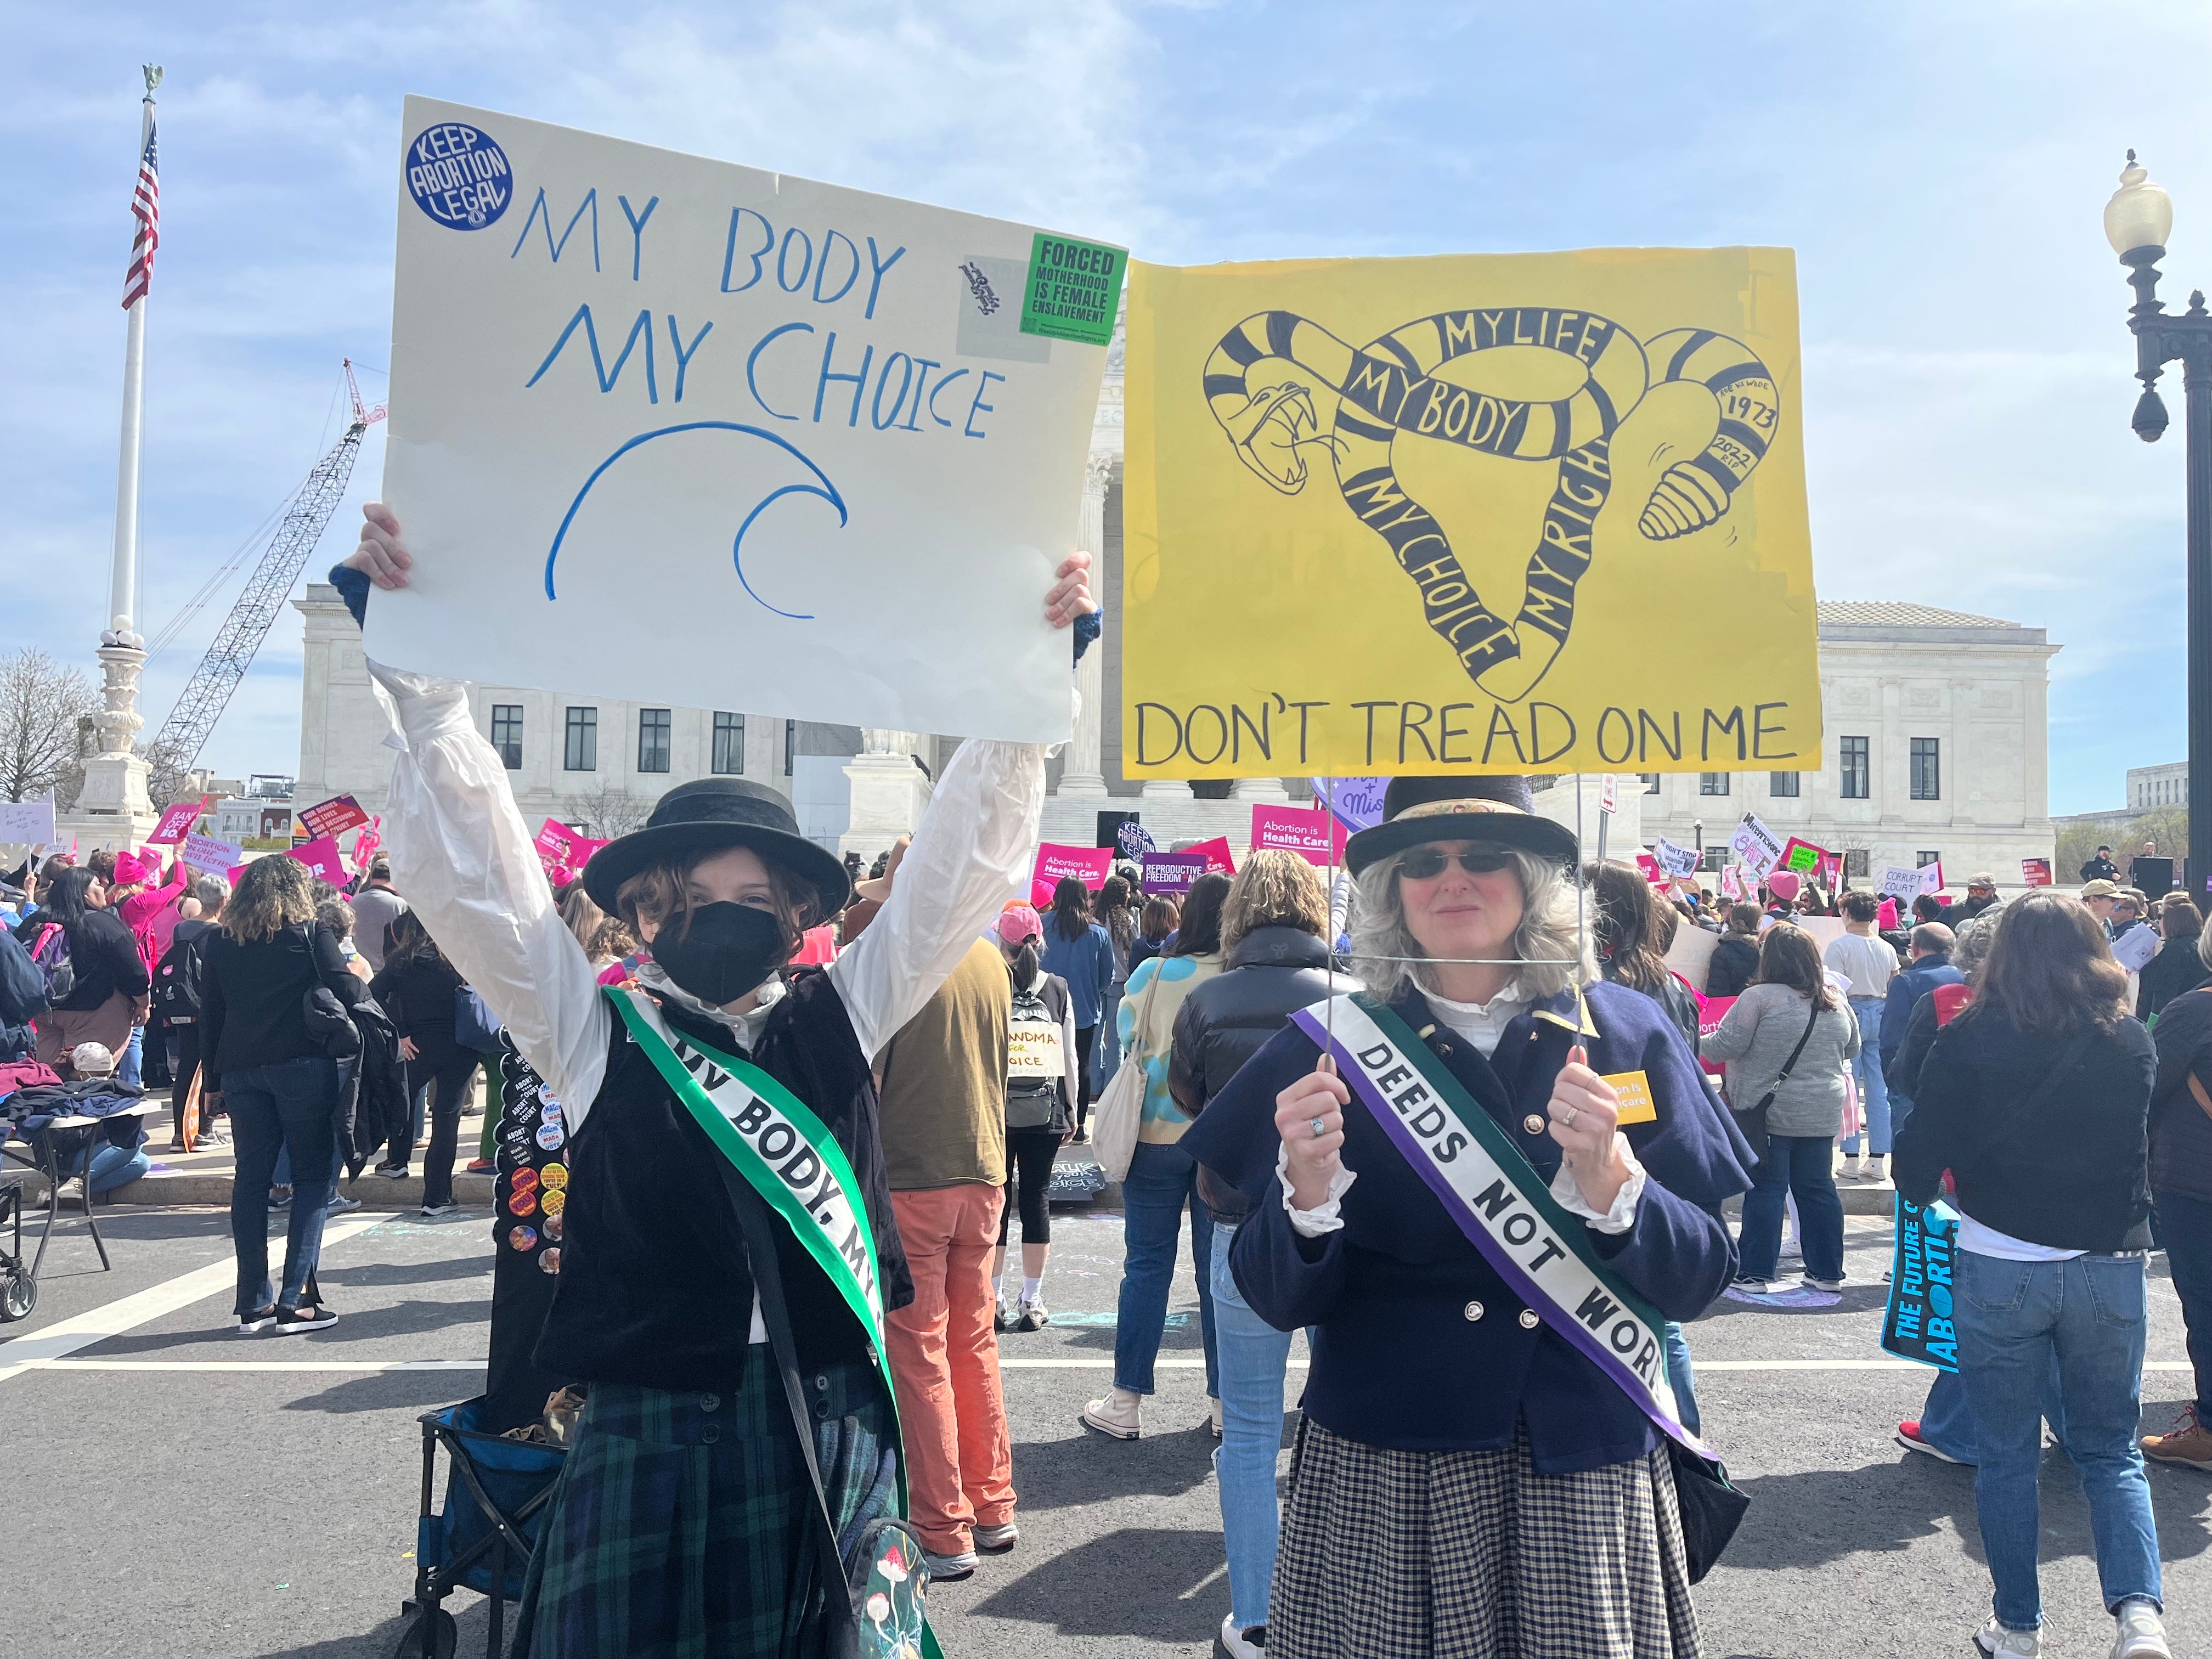 Darcy Nair, right, participates in an abortion rights demonstration dressed as a suffragette